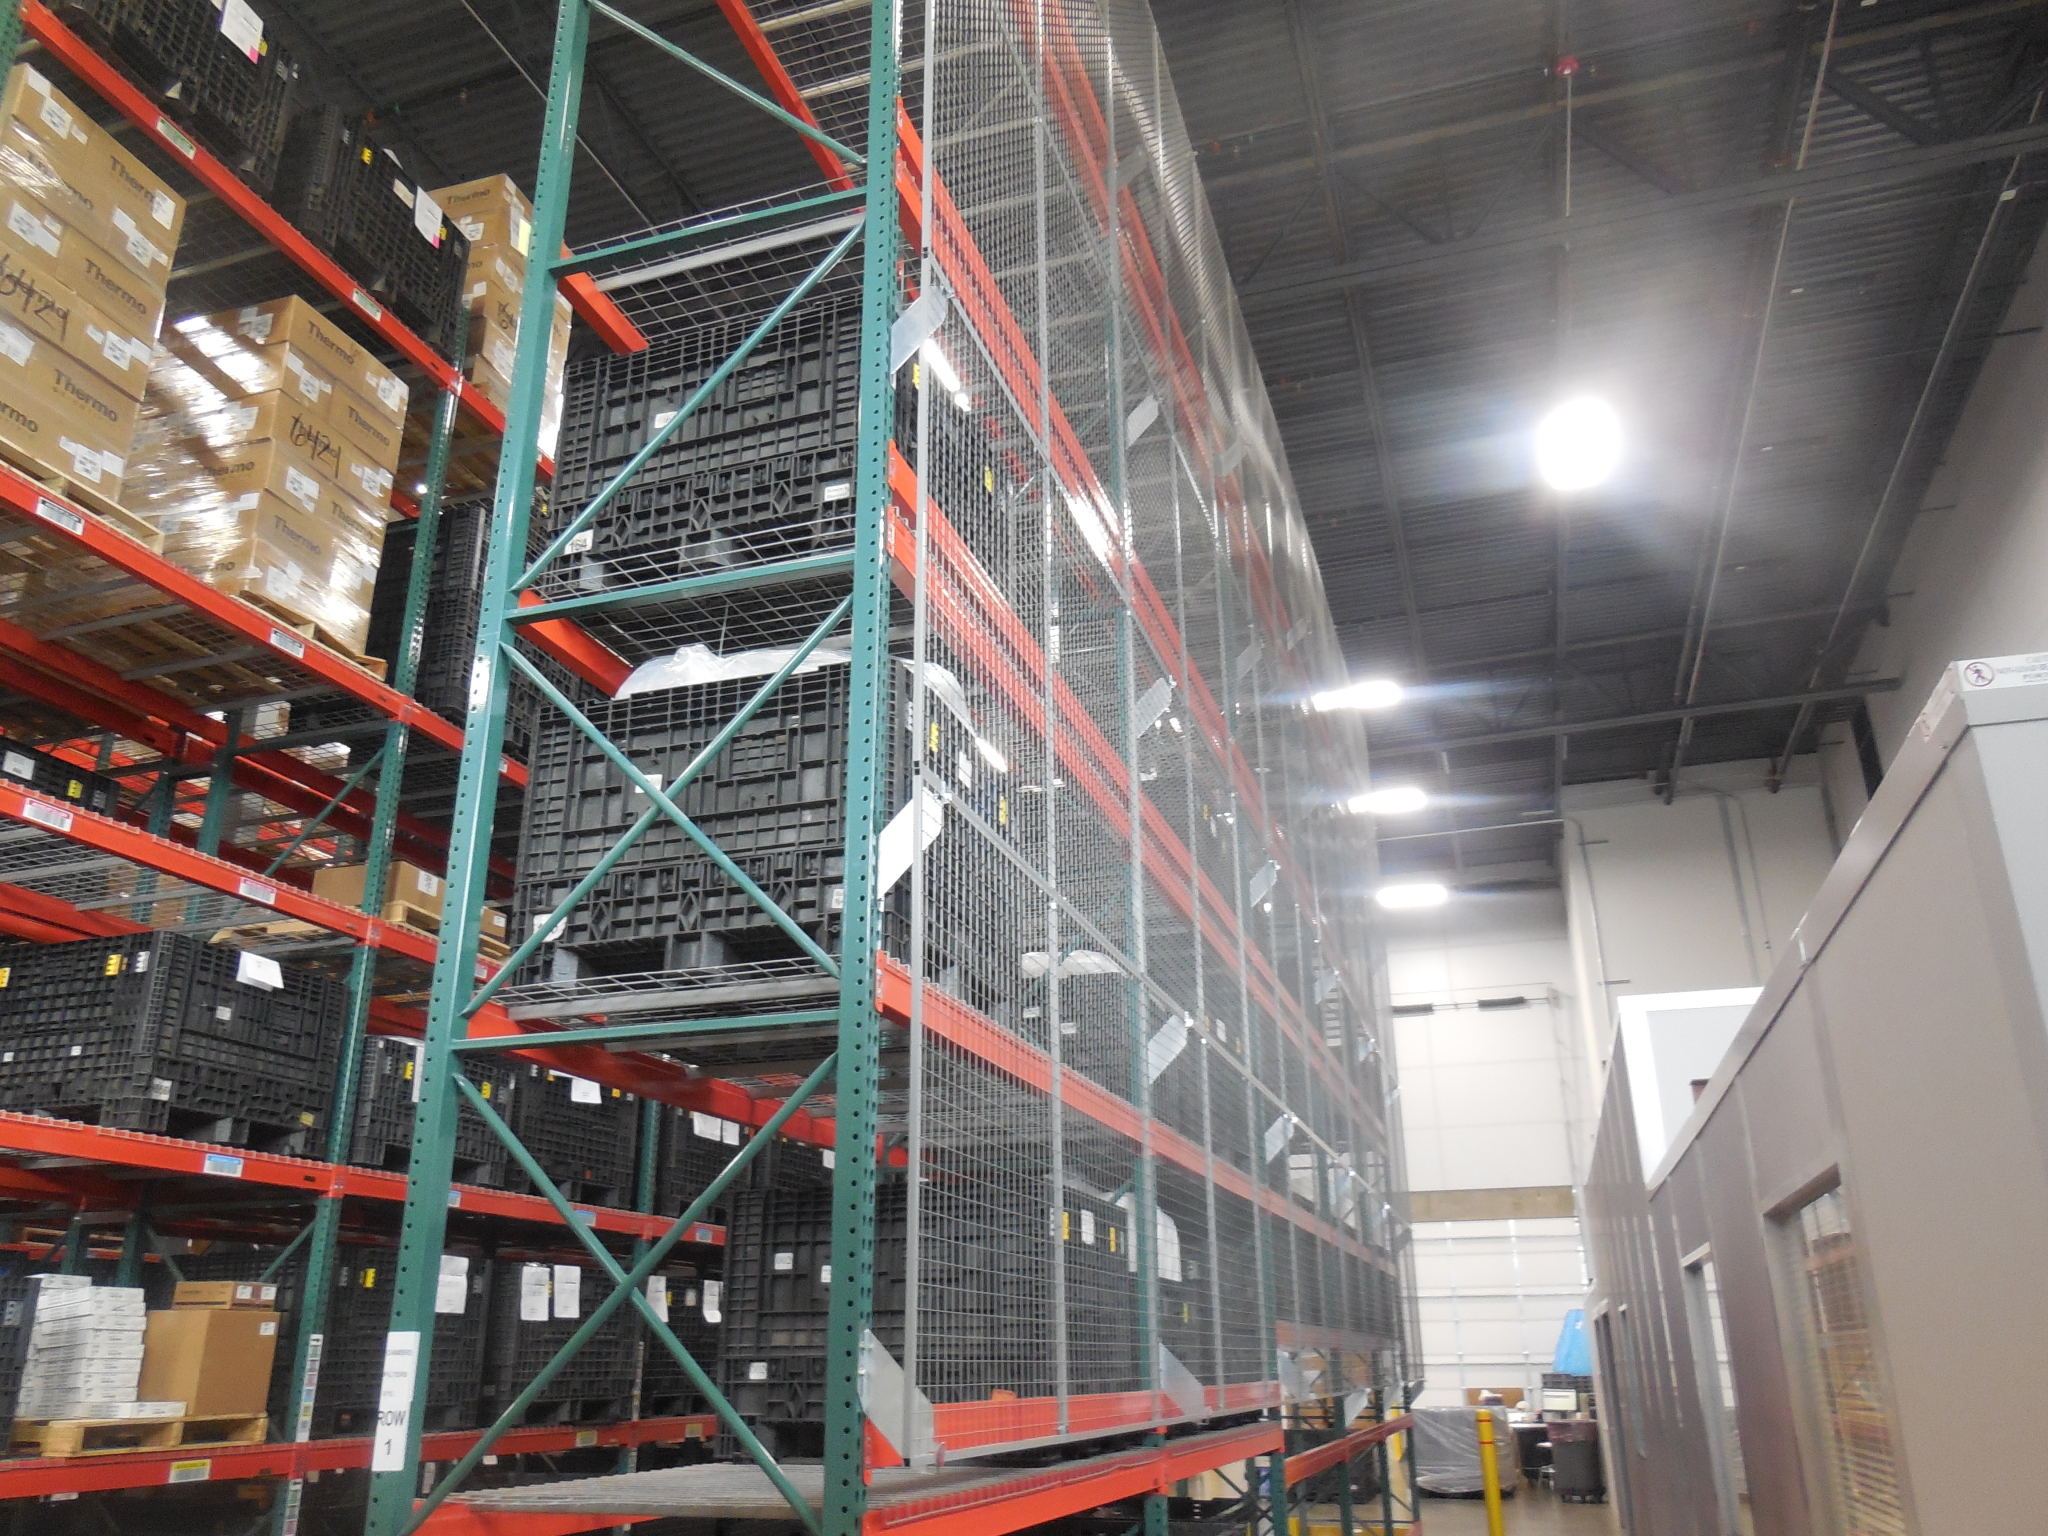 Lance’s Lessons 3 – Your Pallet Racking & Seismic Code